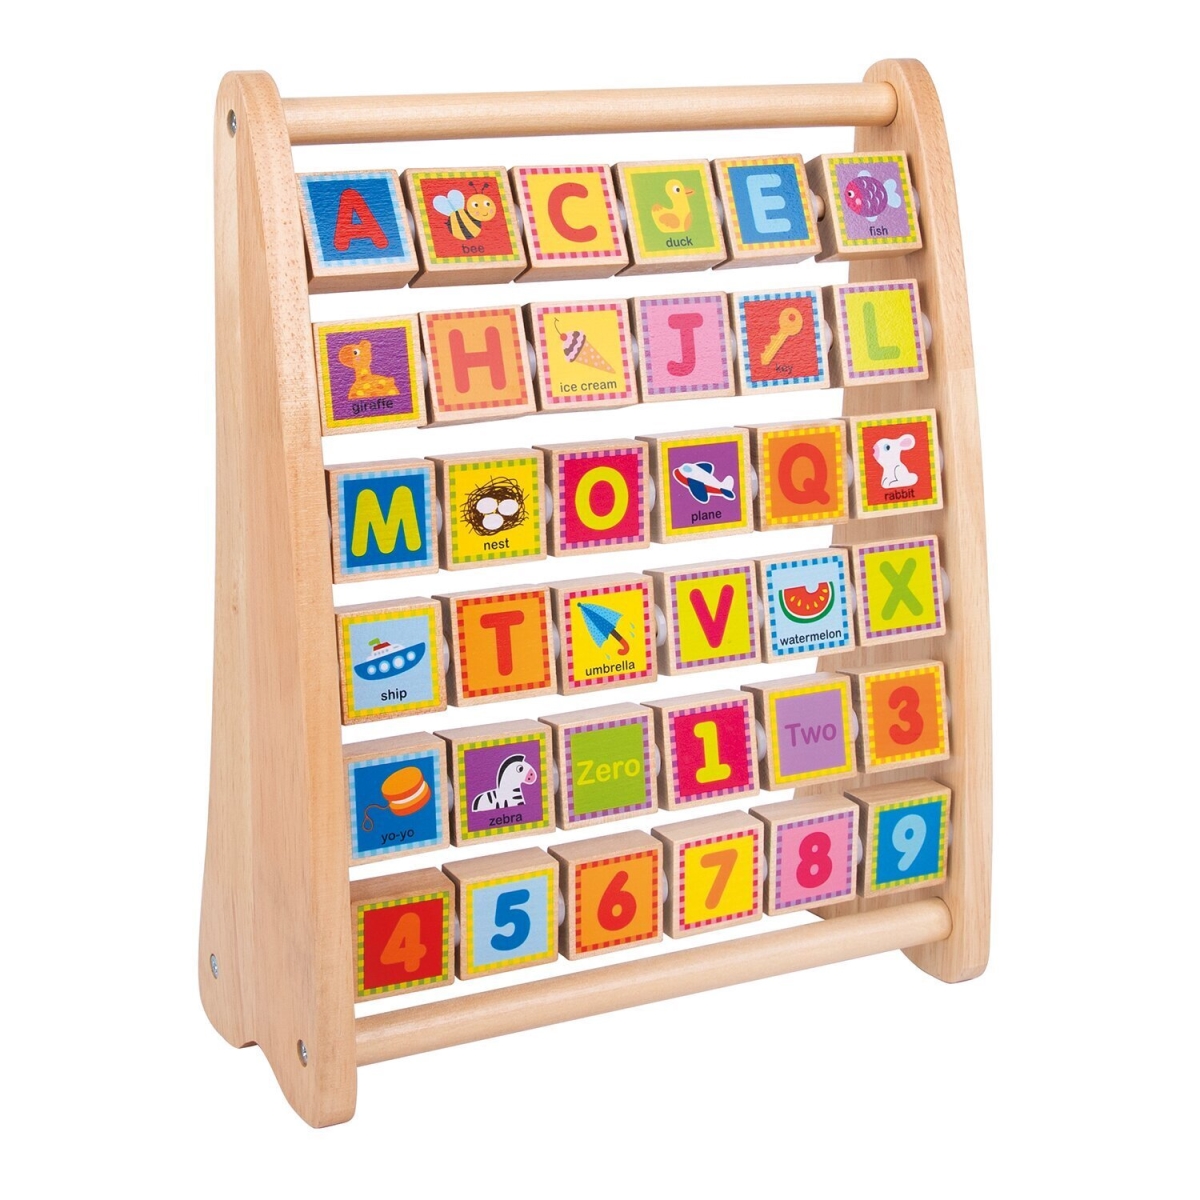 Picture of Tooky Toy 300298 25 x 12 x 32 cm Alphabet Abacus